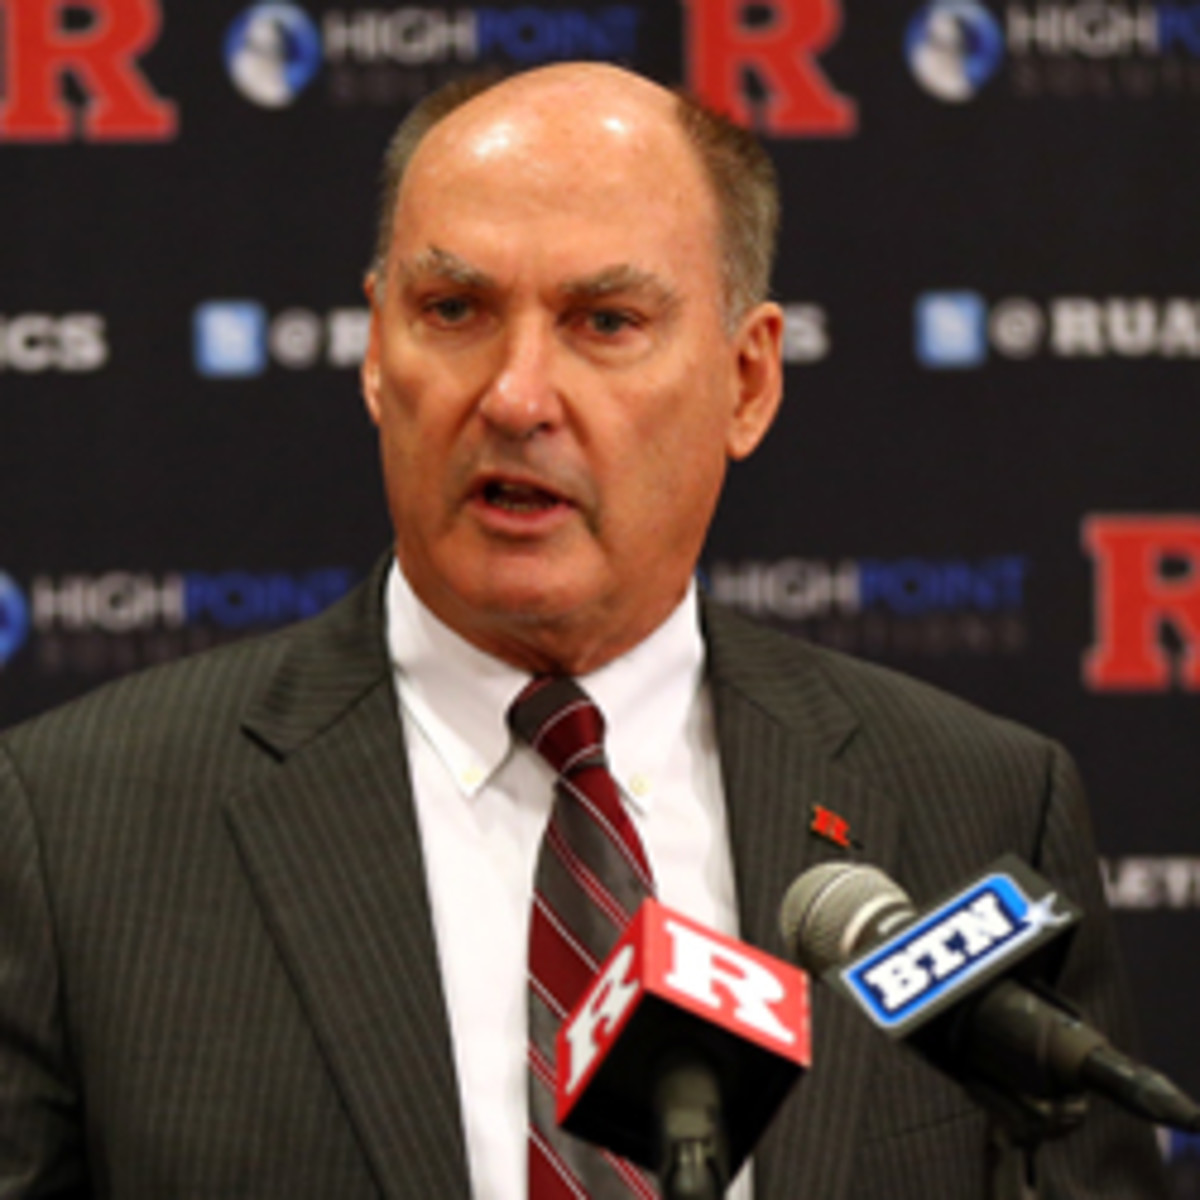 Big Ten commissioner Jim Delany may see the conference realign its divisions for expansion. (Elsa/Getty Images)